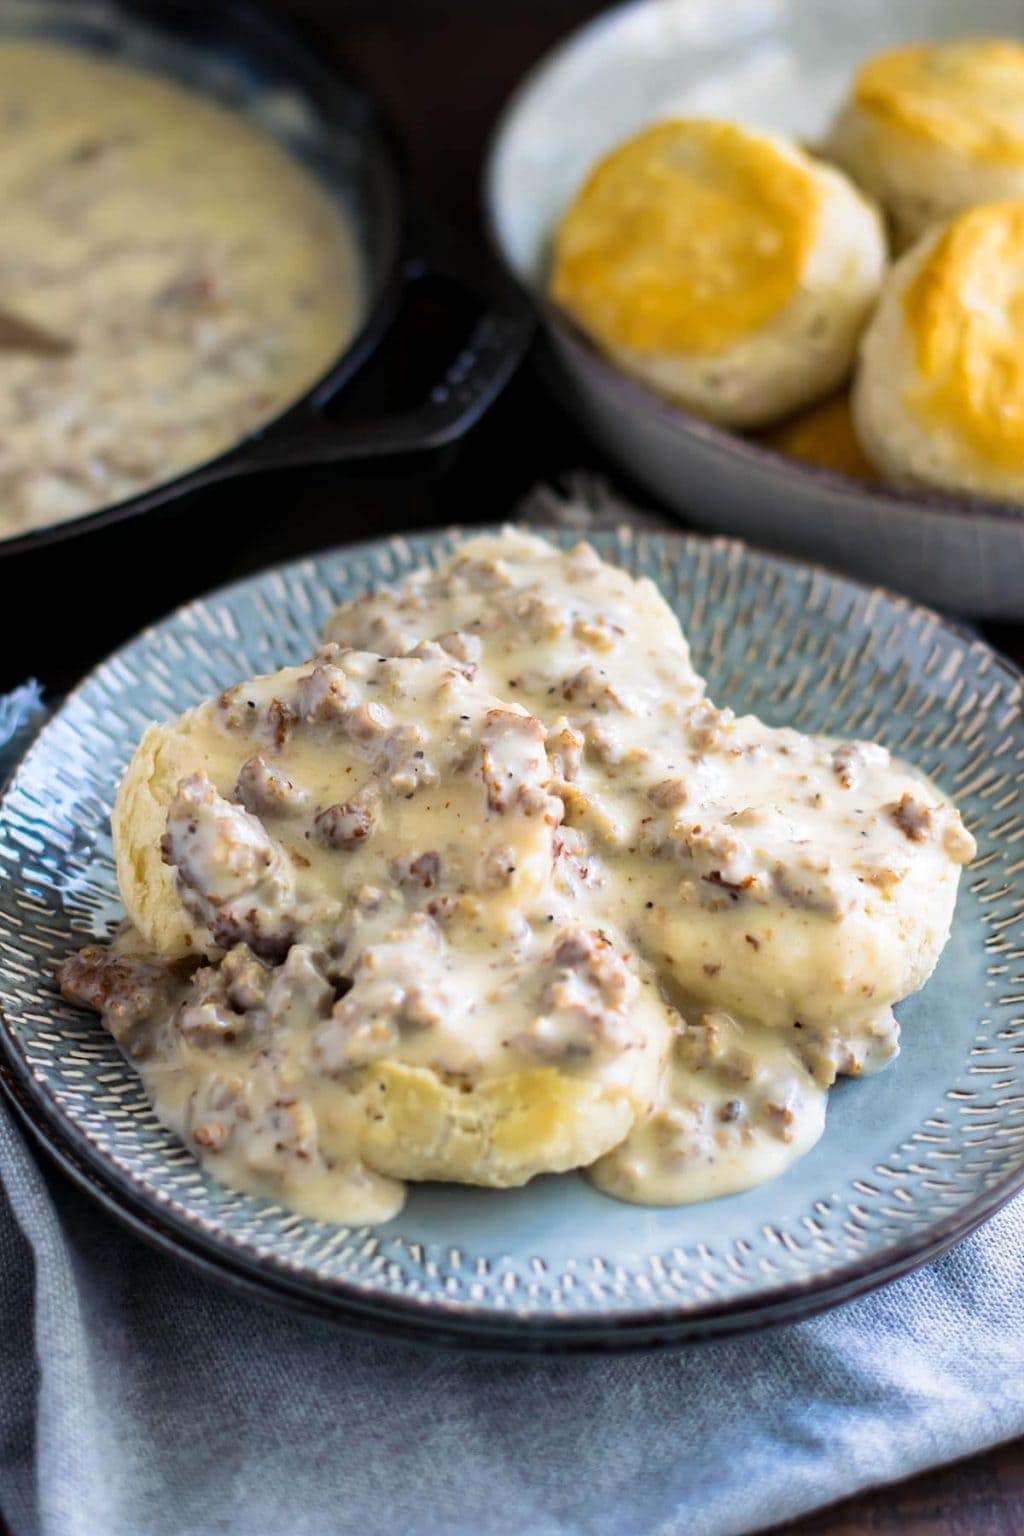 Best Sausage Gravy Recipe - Soulfully Made